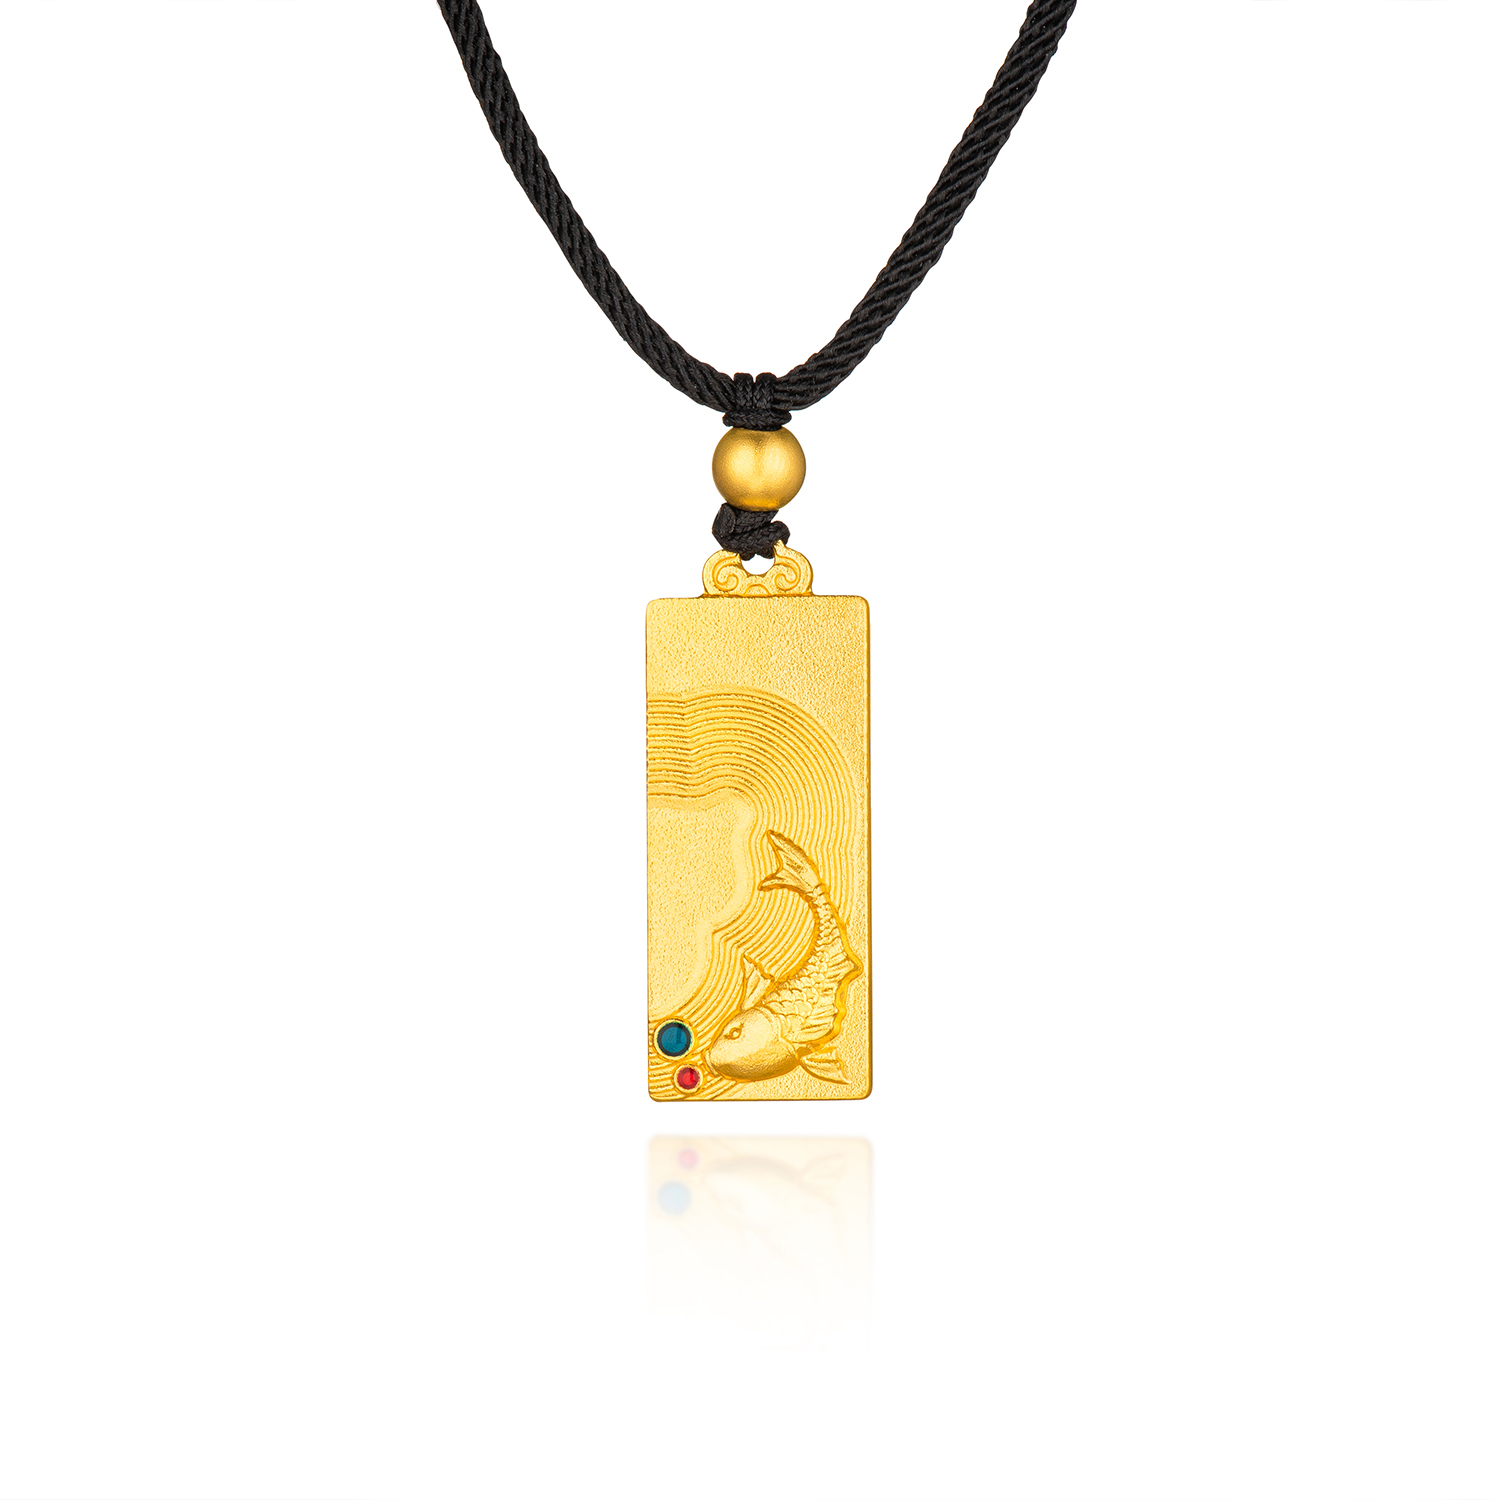 Heirloom Fortune Collection “Endless Fortune” Gold Necklace 